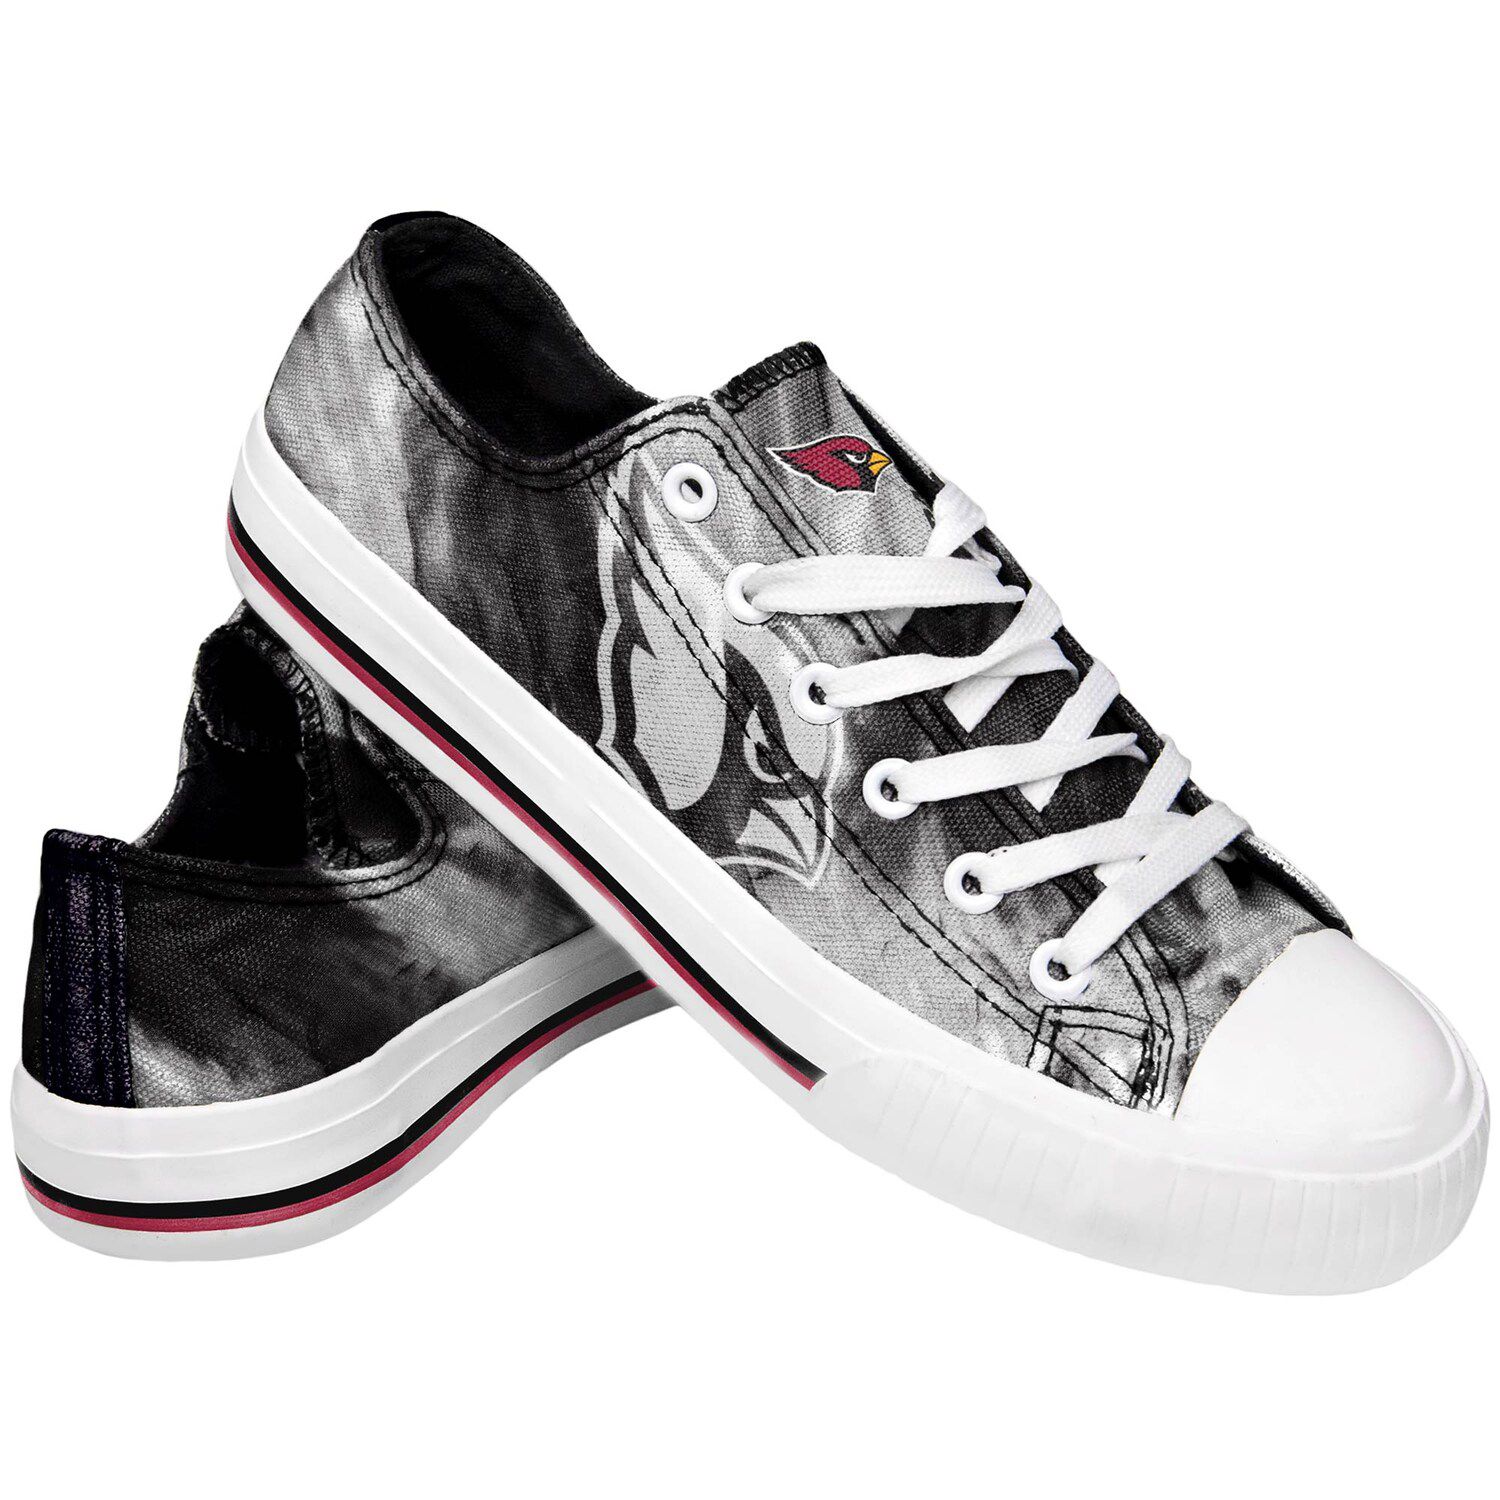 Image for Unbranded Women's Arizona Cardinals Tie-Dye Canvas Shoe at Kohl's.